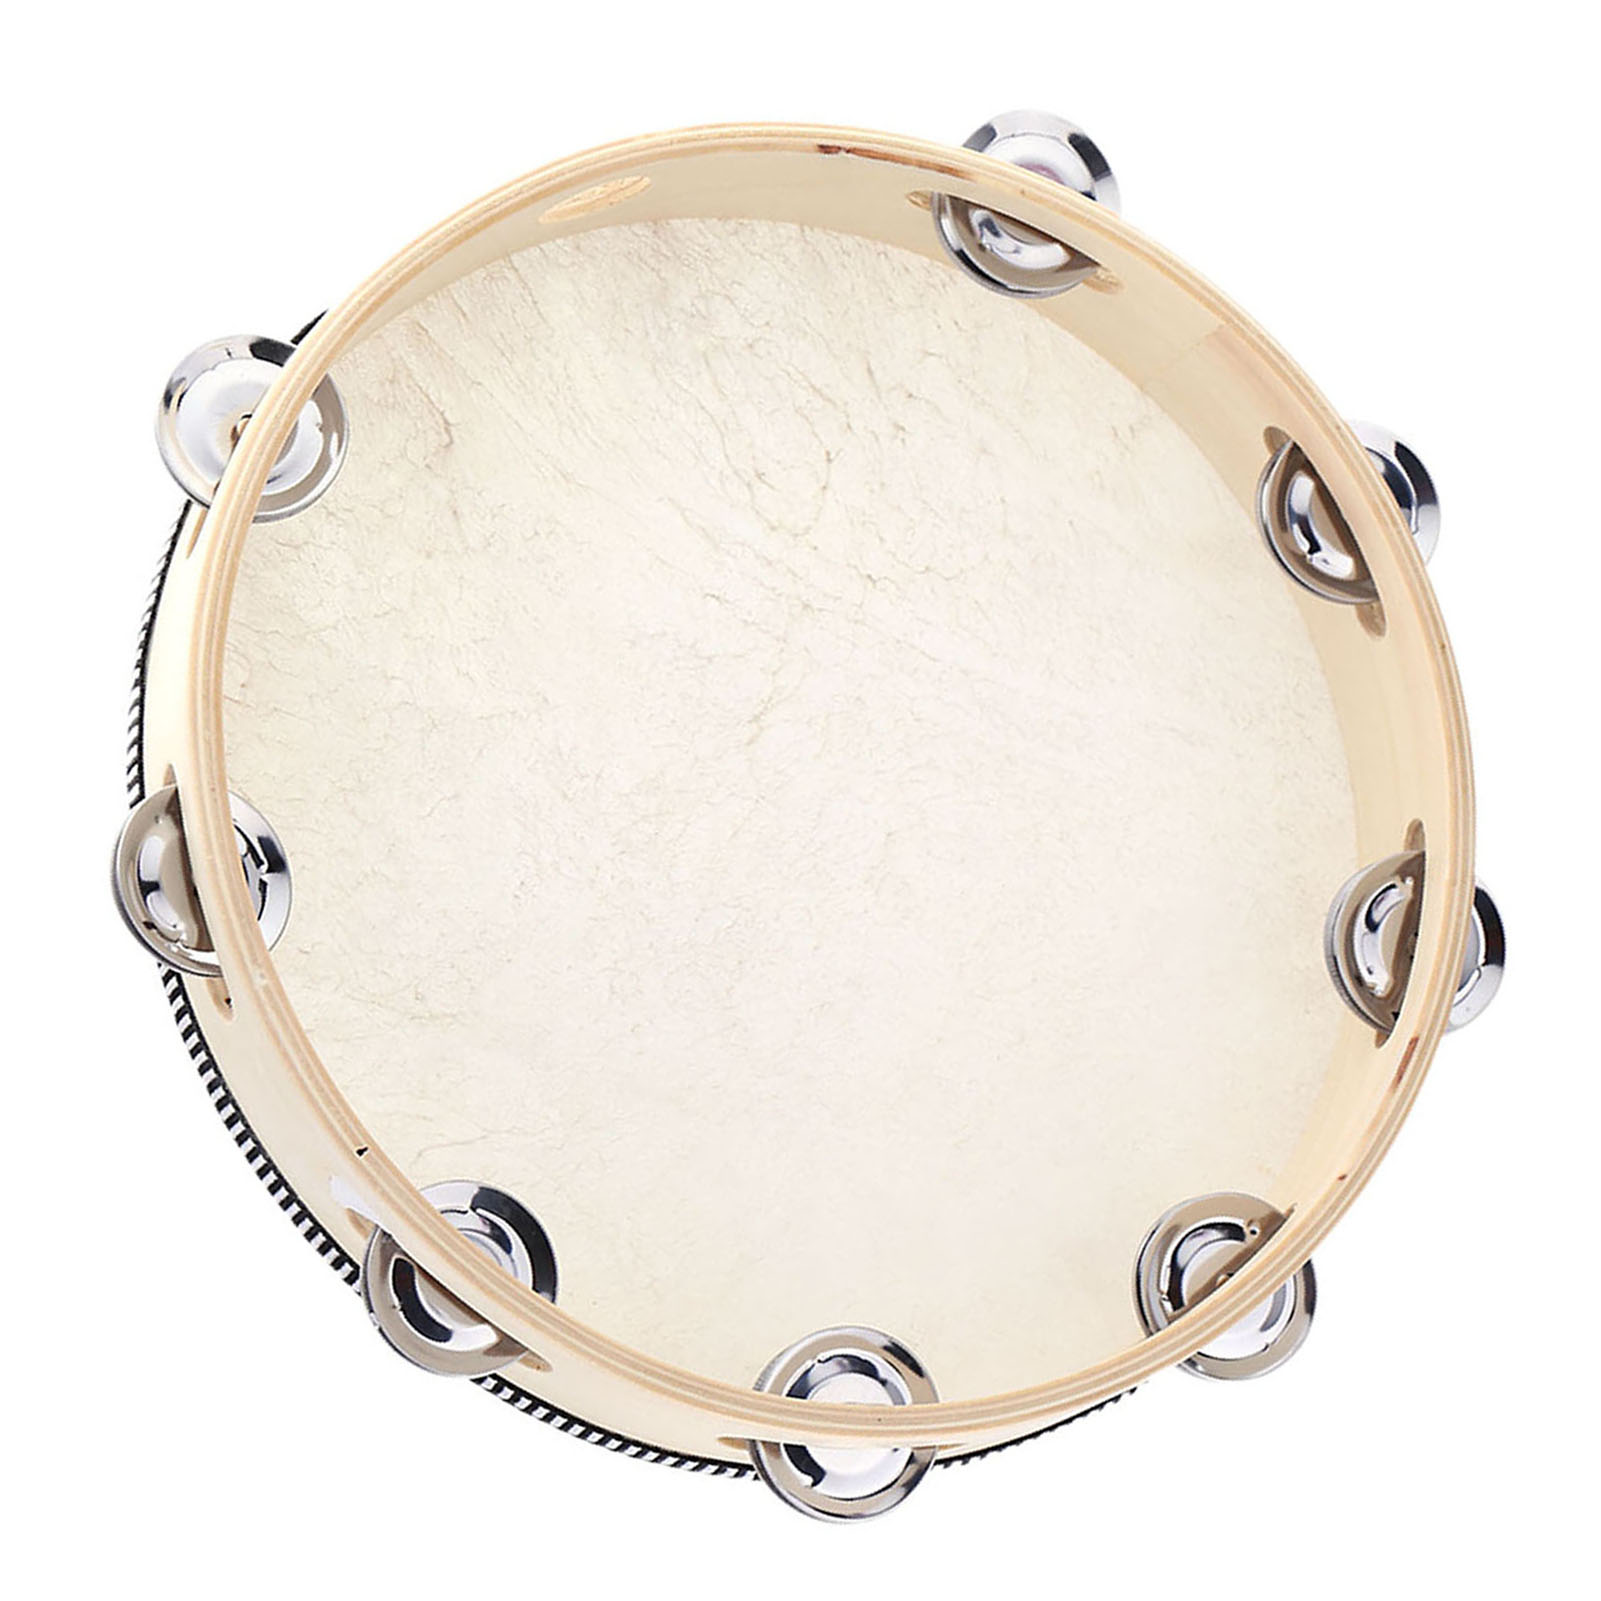 Andoer 10" Hand Held Tambourine Drum Bell Birch Metal Jingles Percussion Musical Educational Instrument for KTV Party Kids Games - image 1 of 7